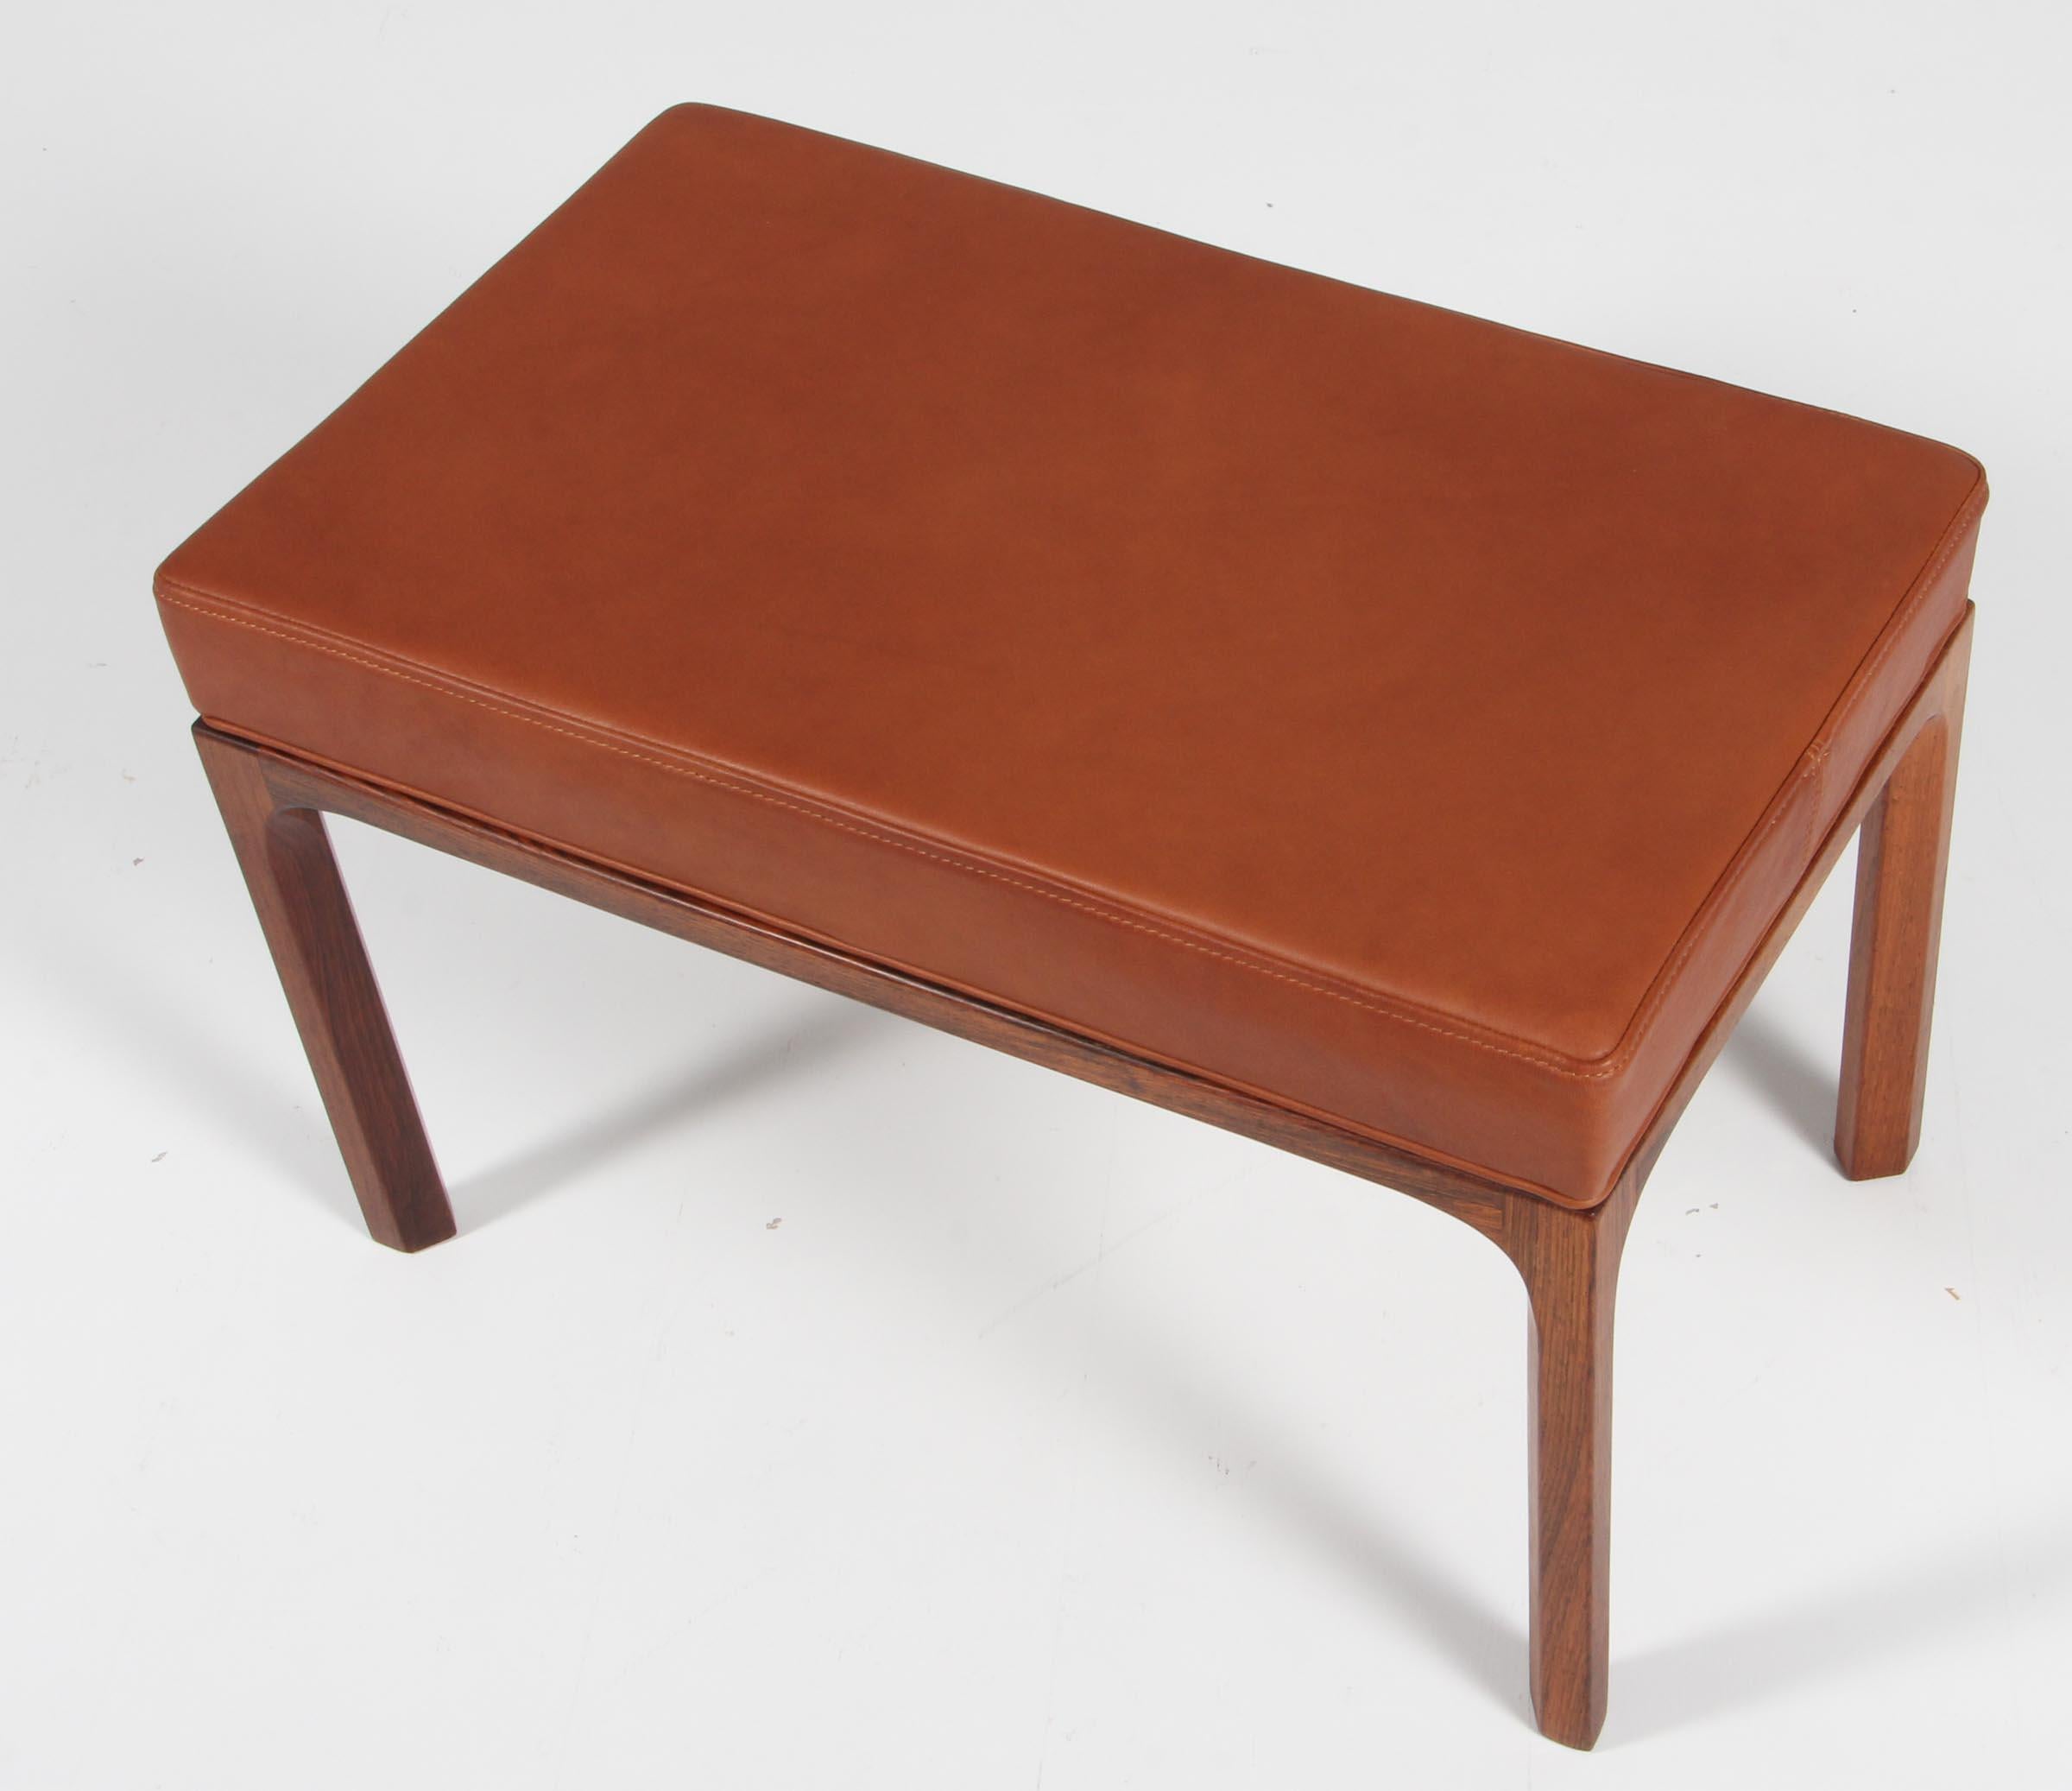 Kai Kristiansen ottoman with new upholstered seat in cognac aniline leather.

Made of solid rosewood.

Made by Aksel Kjersgaard 1960s.